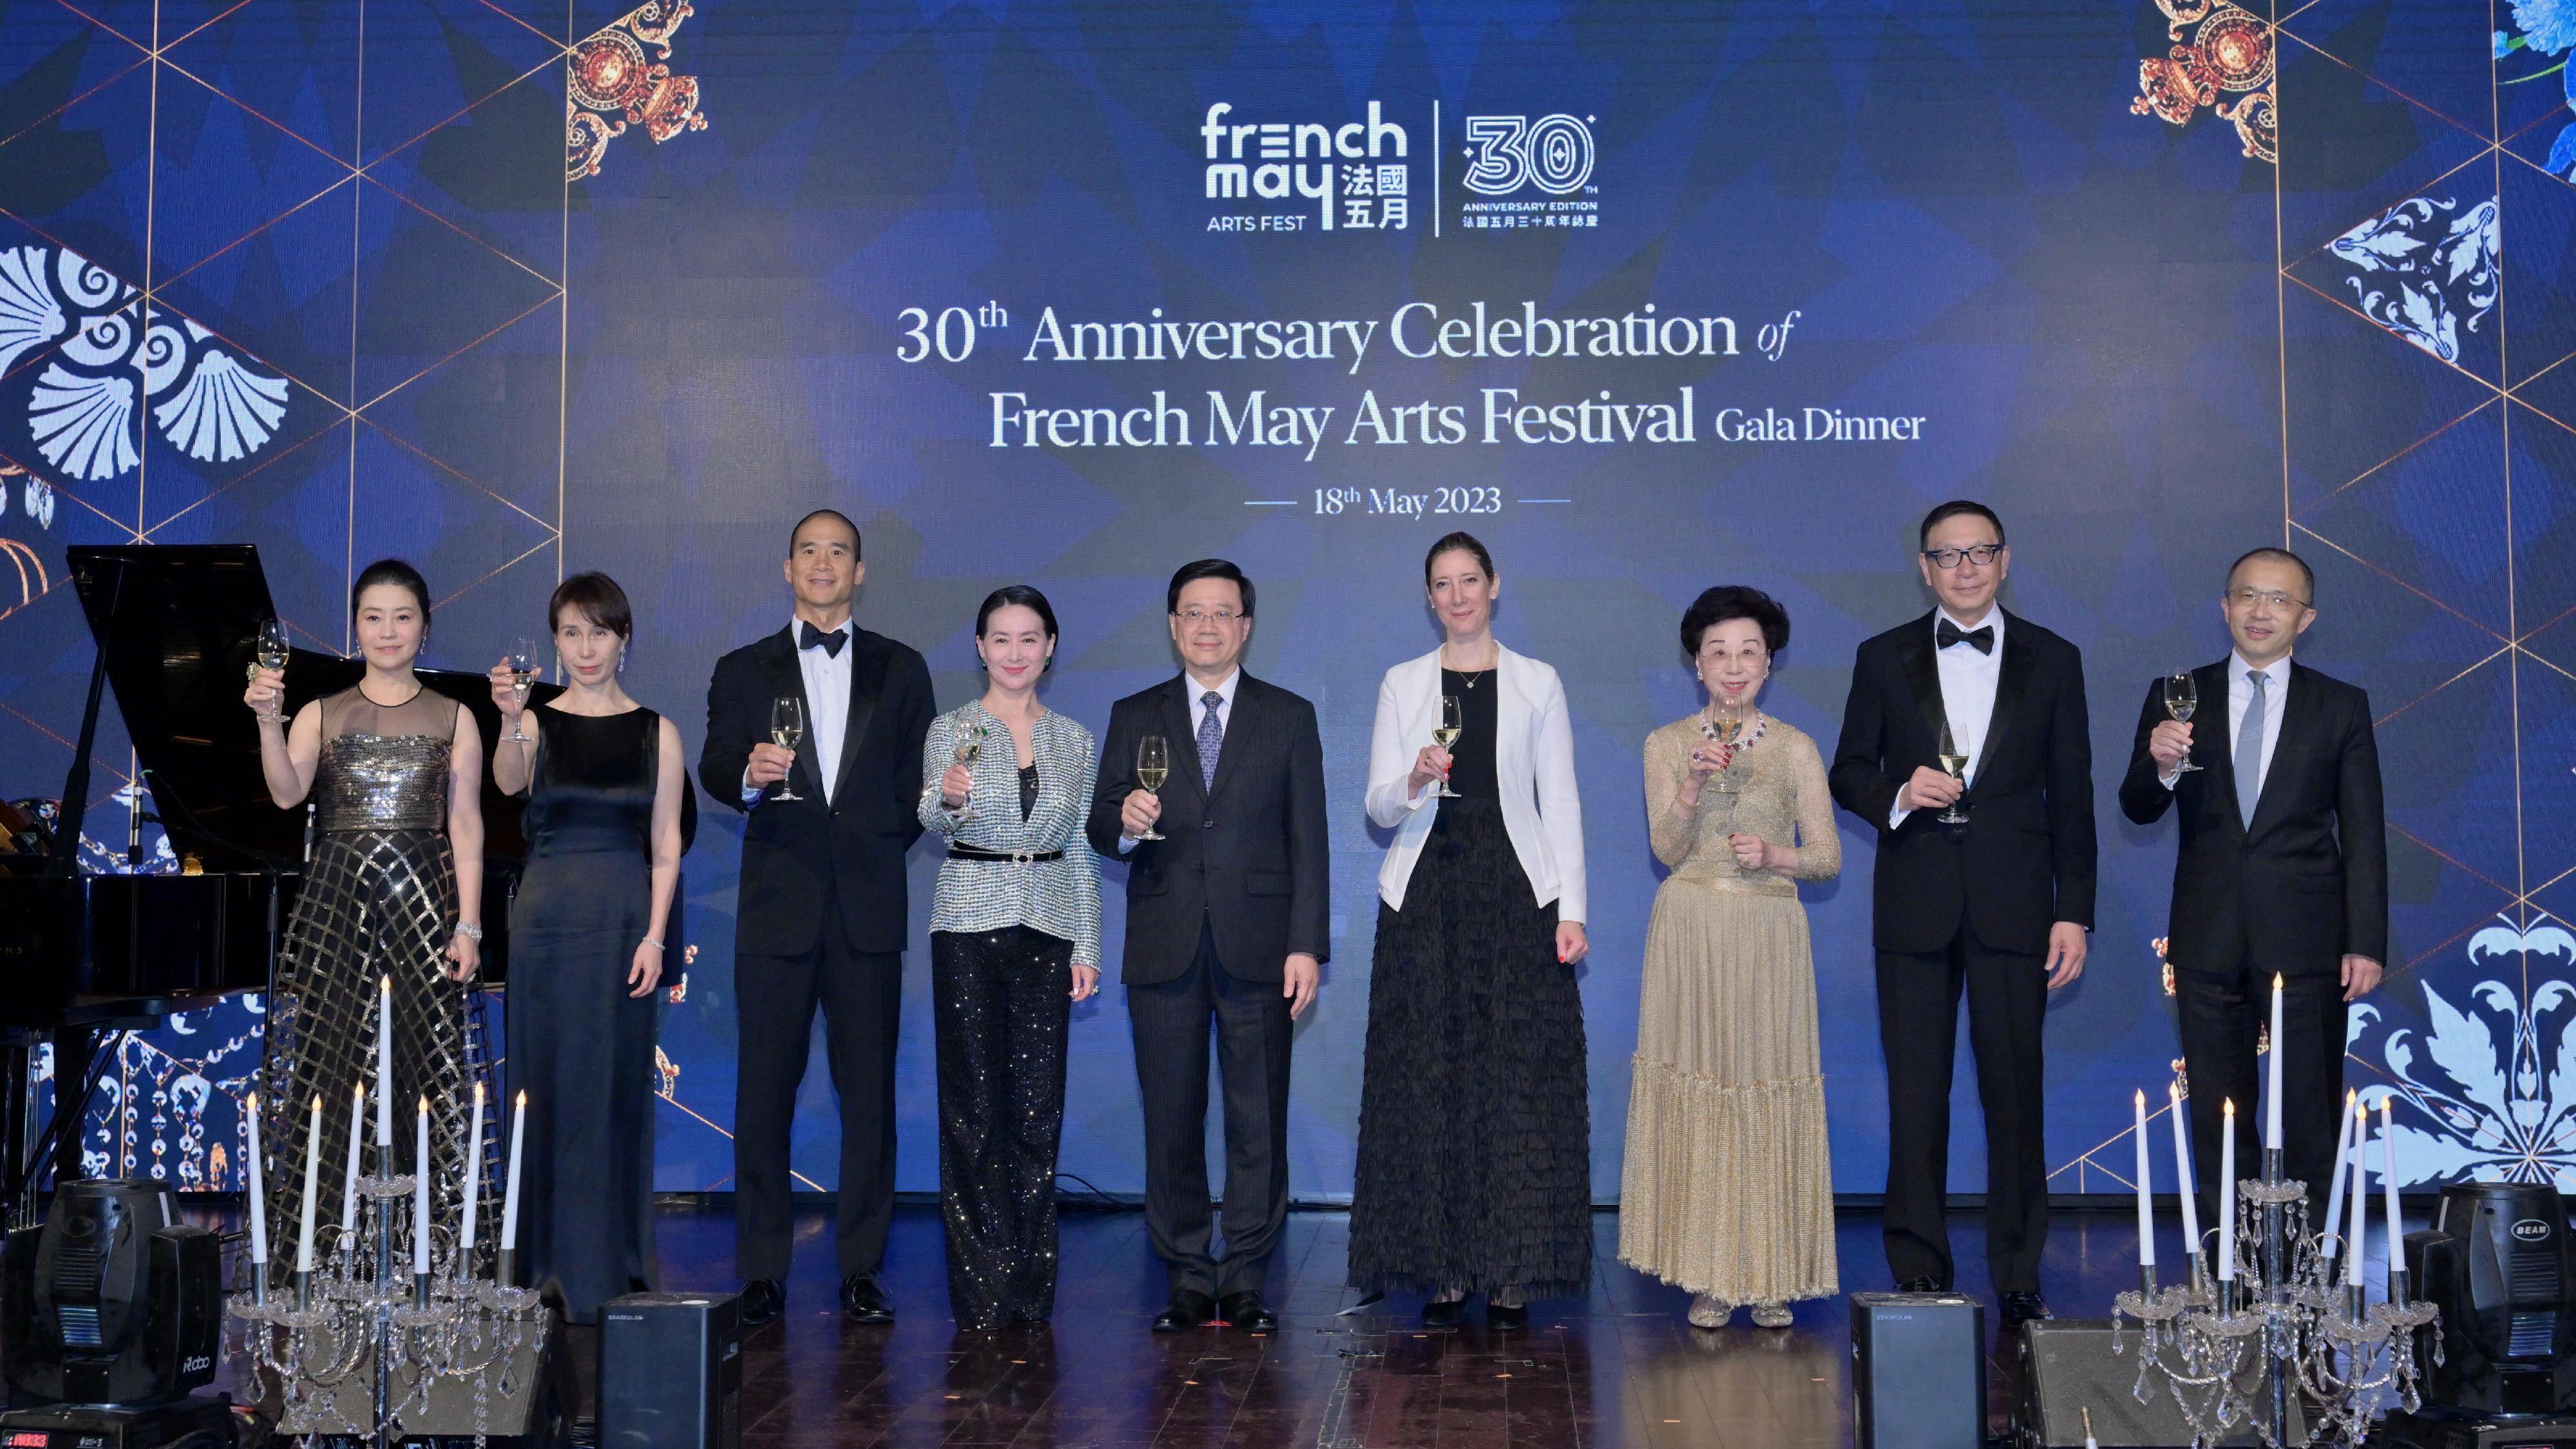 The Chief Executive, Mr John Lee, attended the 30th Anniversary Celebration of French May Arts Festival Gala Dinner today (May 18). Photo shows (from fourth left) Co-chairman of the Board of French May Arts Festival Ms Pansy Ho; Mr Lee; the Consul General of France in Hong Kong and Macau, Mrs Christile Drulhe; Co-chairman of the Board of French May Arts Festival Mrs Mignonne Cheng, and other guests.